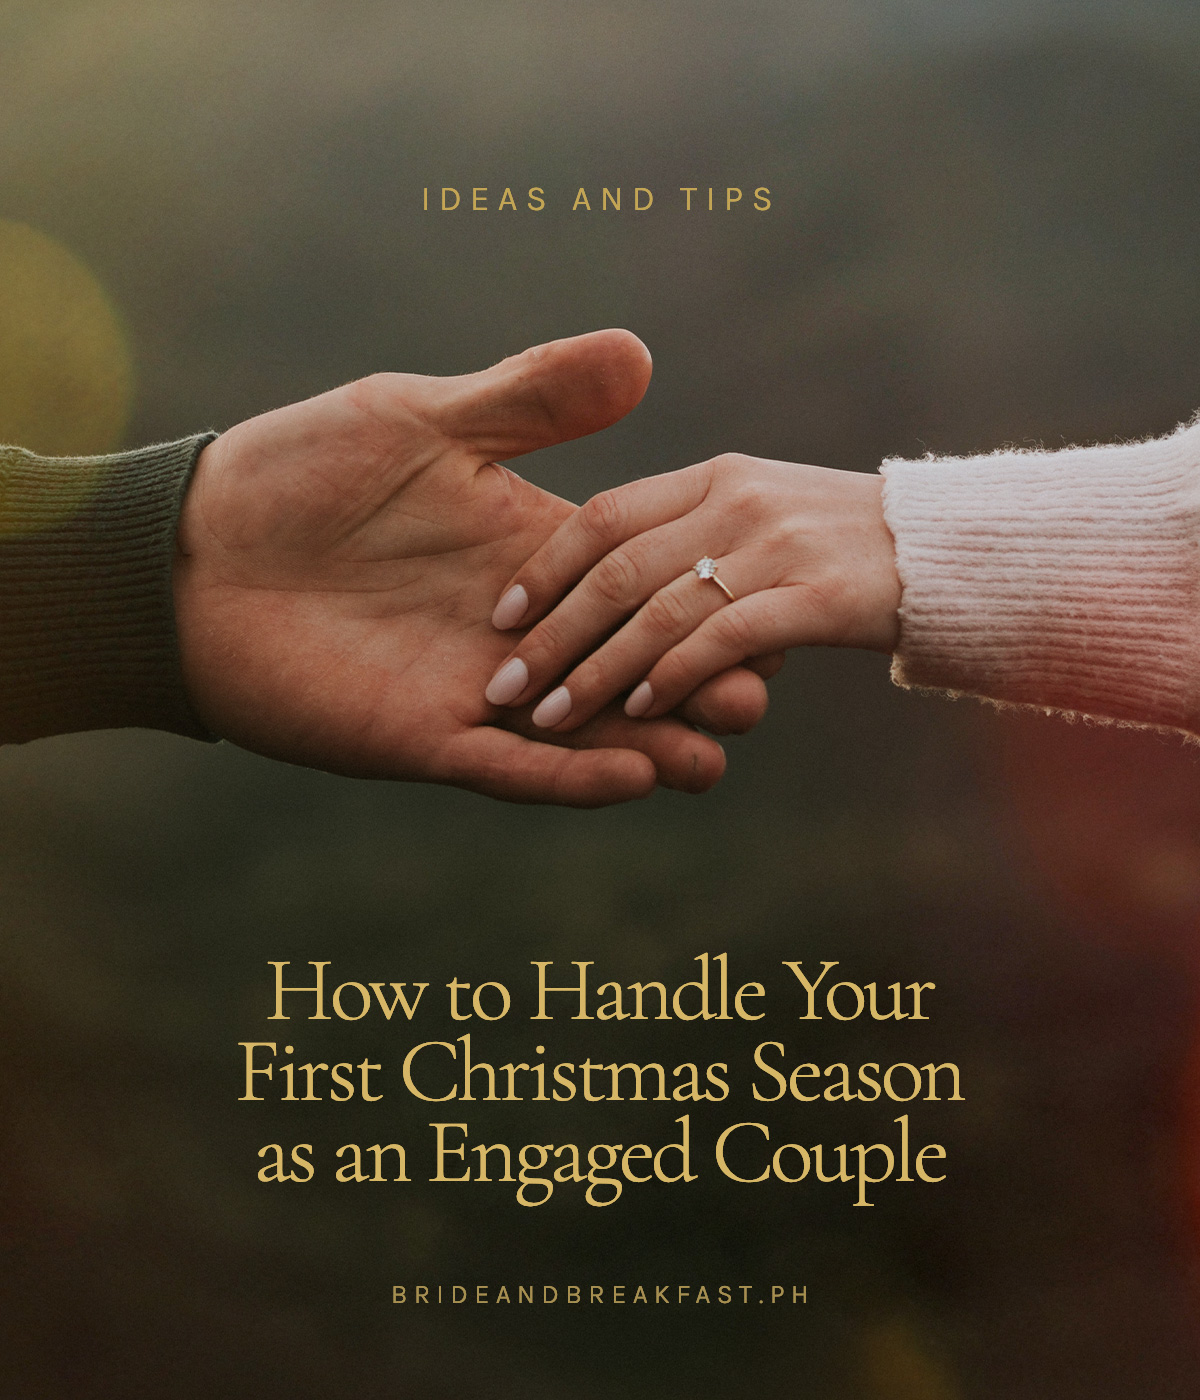 How to Handle Your First Christmas Season as an Engaged Couple